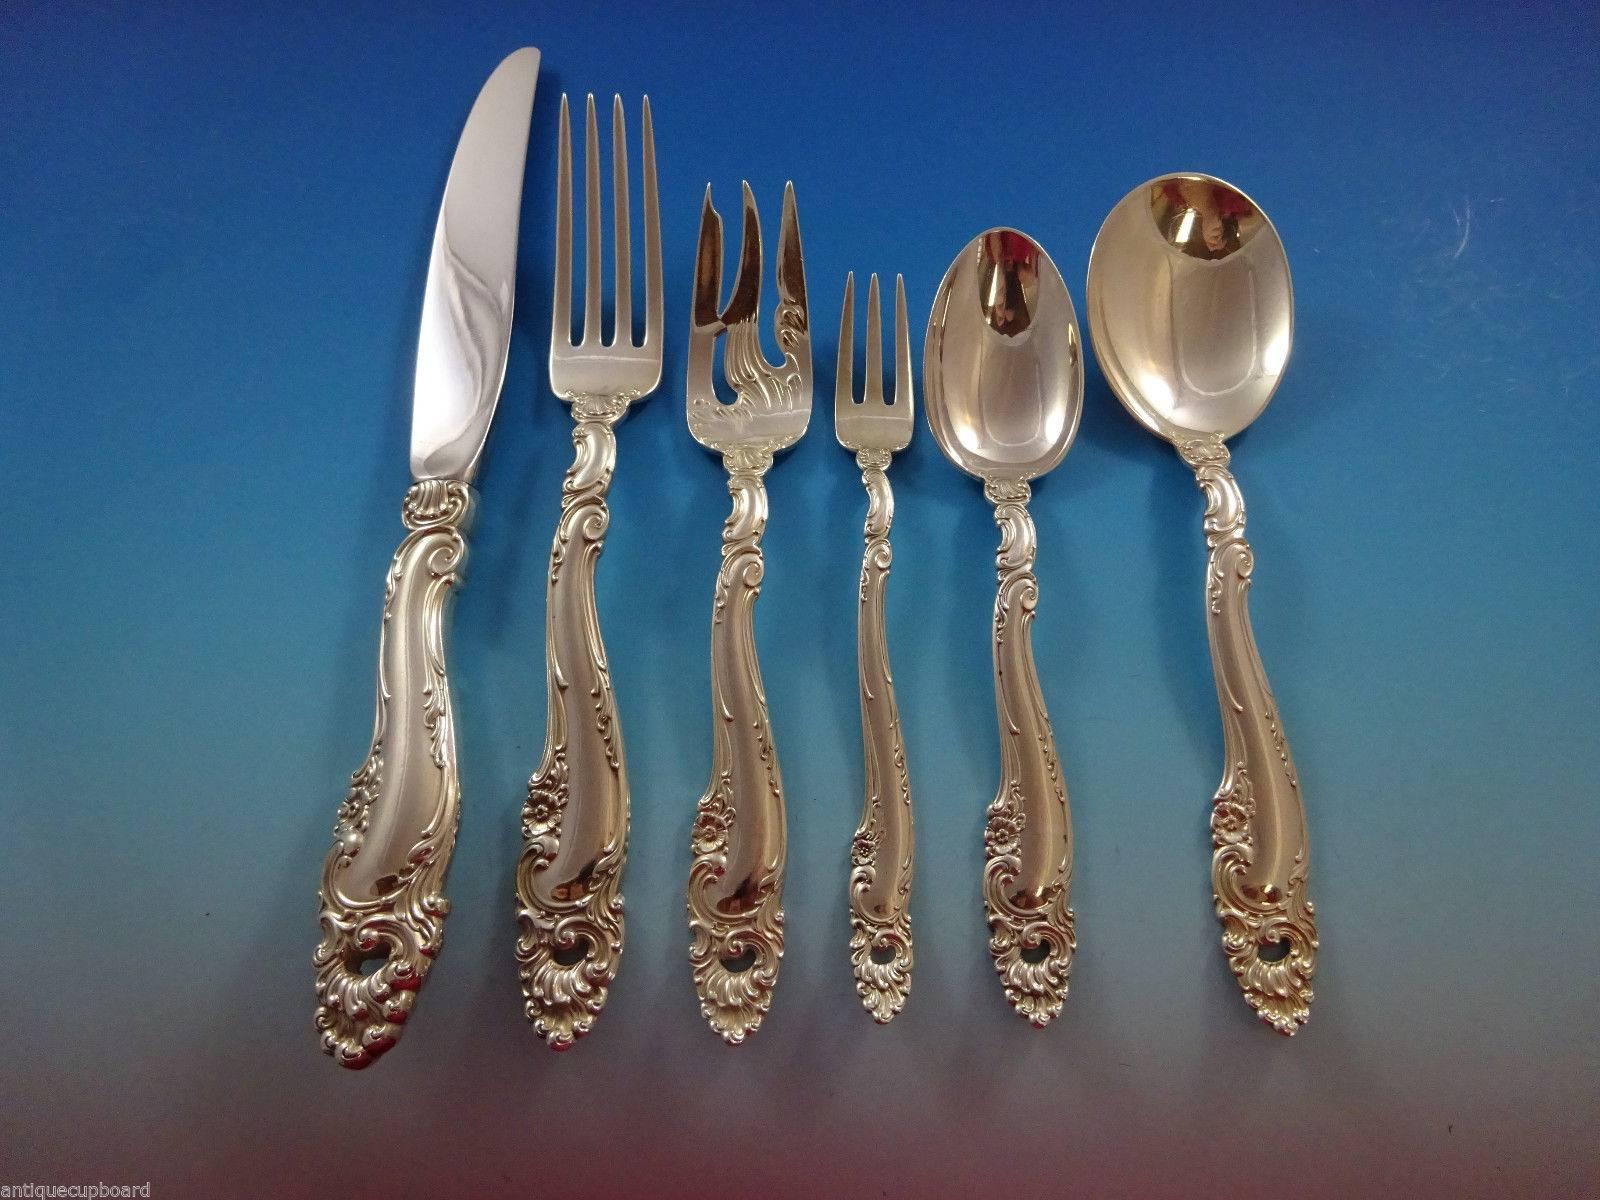 Decor by Gorham sterling silver flatware set of 60 pieces. This pattern is heavy and features Rococo swirls, shells and small flowers. This set includes:

Eight knives, 9